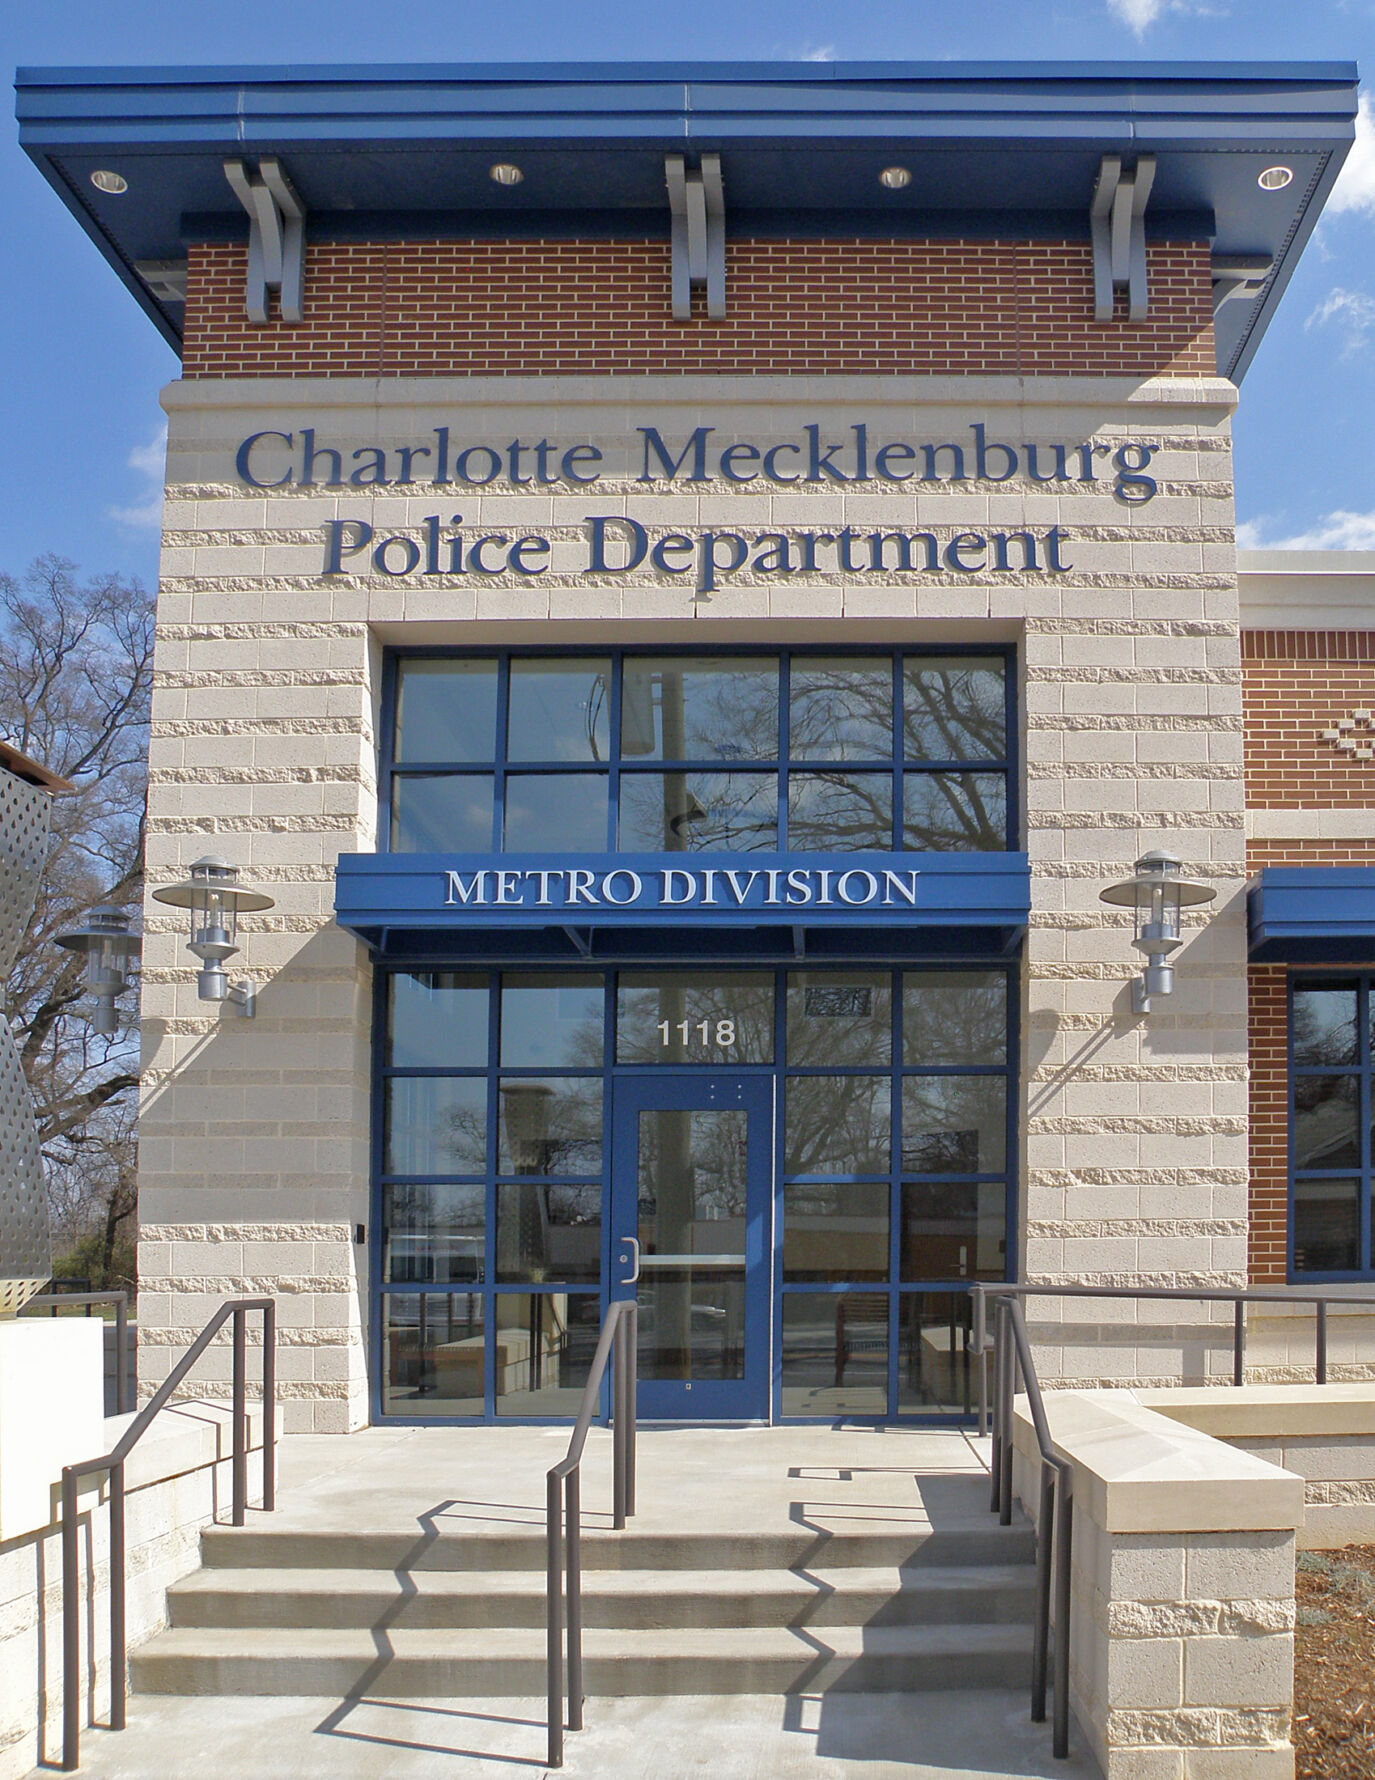 Charlotte-Mecklenburg Police Department Metro Division featuring Prestige Masonry Architectural Block - Weathered Face in Summit Silt